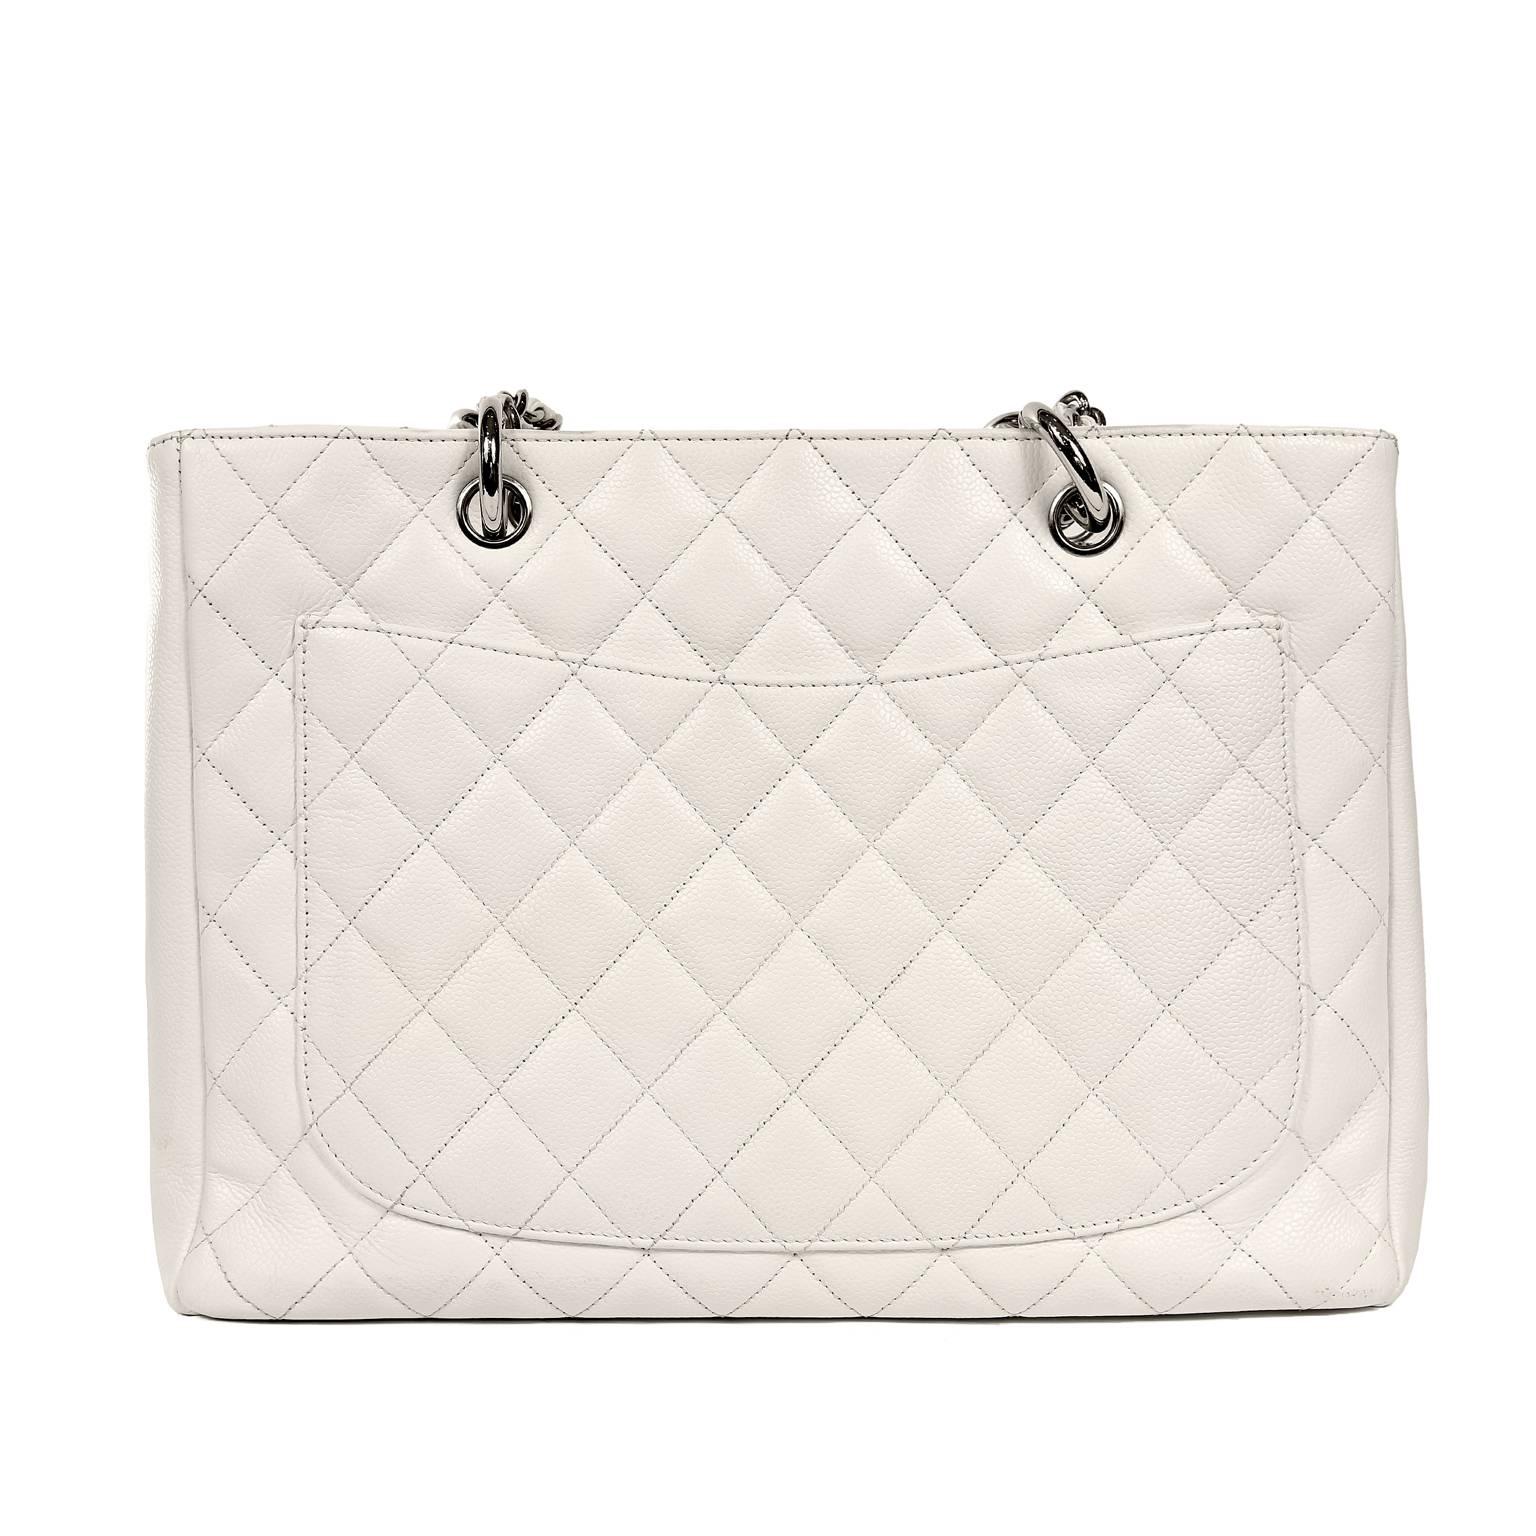 Chanel White Caviar GST- MINT
 The beloved GST is from the Timeless Classics Collection and is a versatile accompaniment to any ensemble. 
Textured and durable snowy white caviar leather is quilted in signature Chanel diamond pattern.  Large